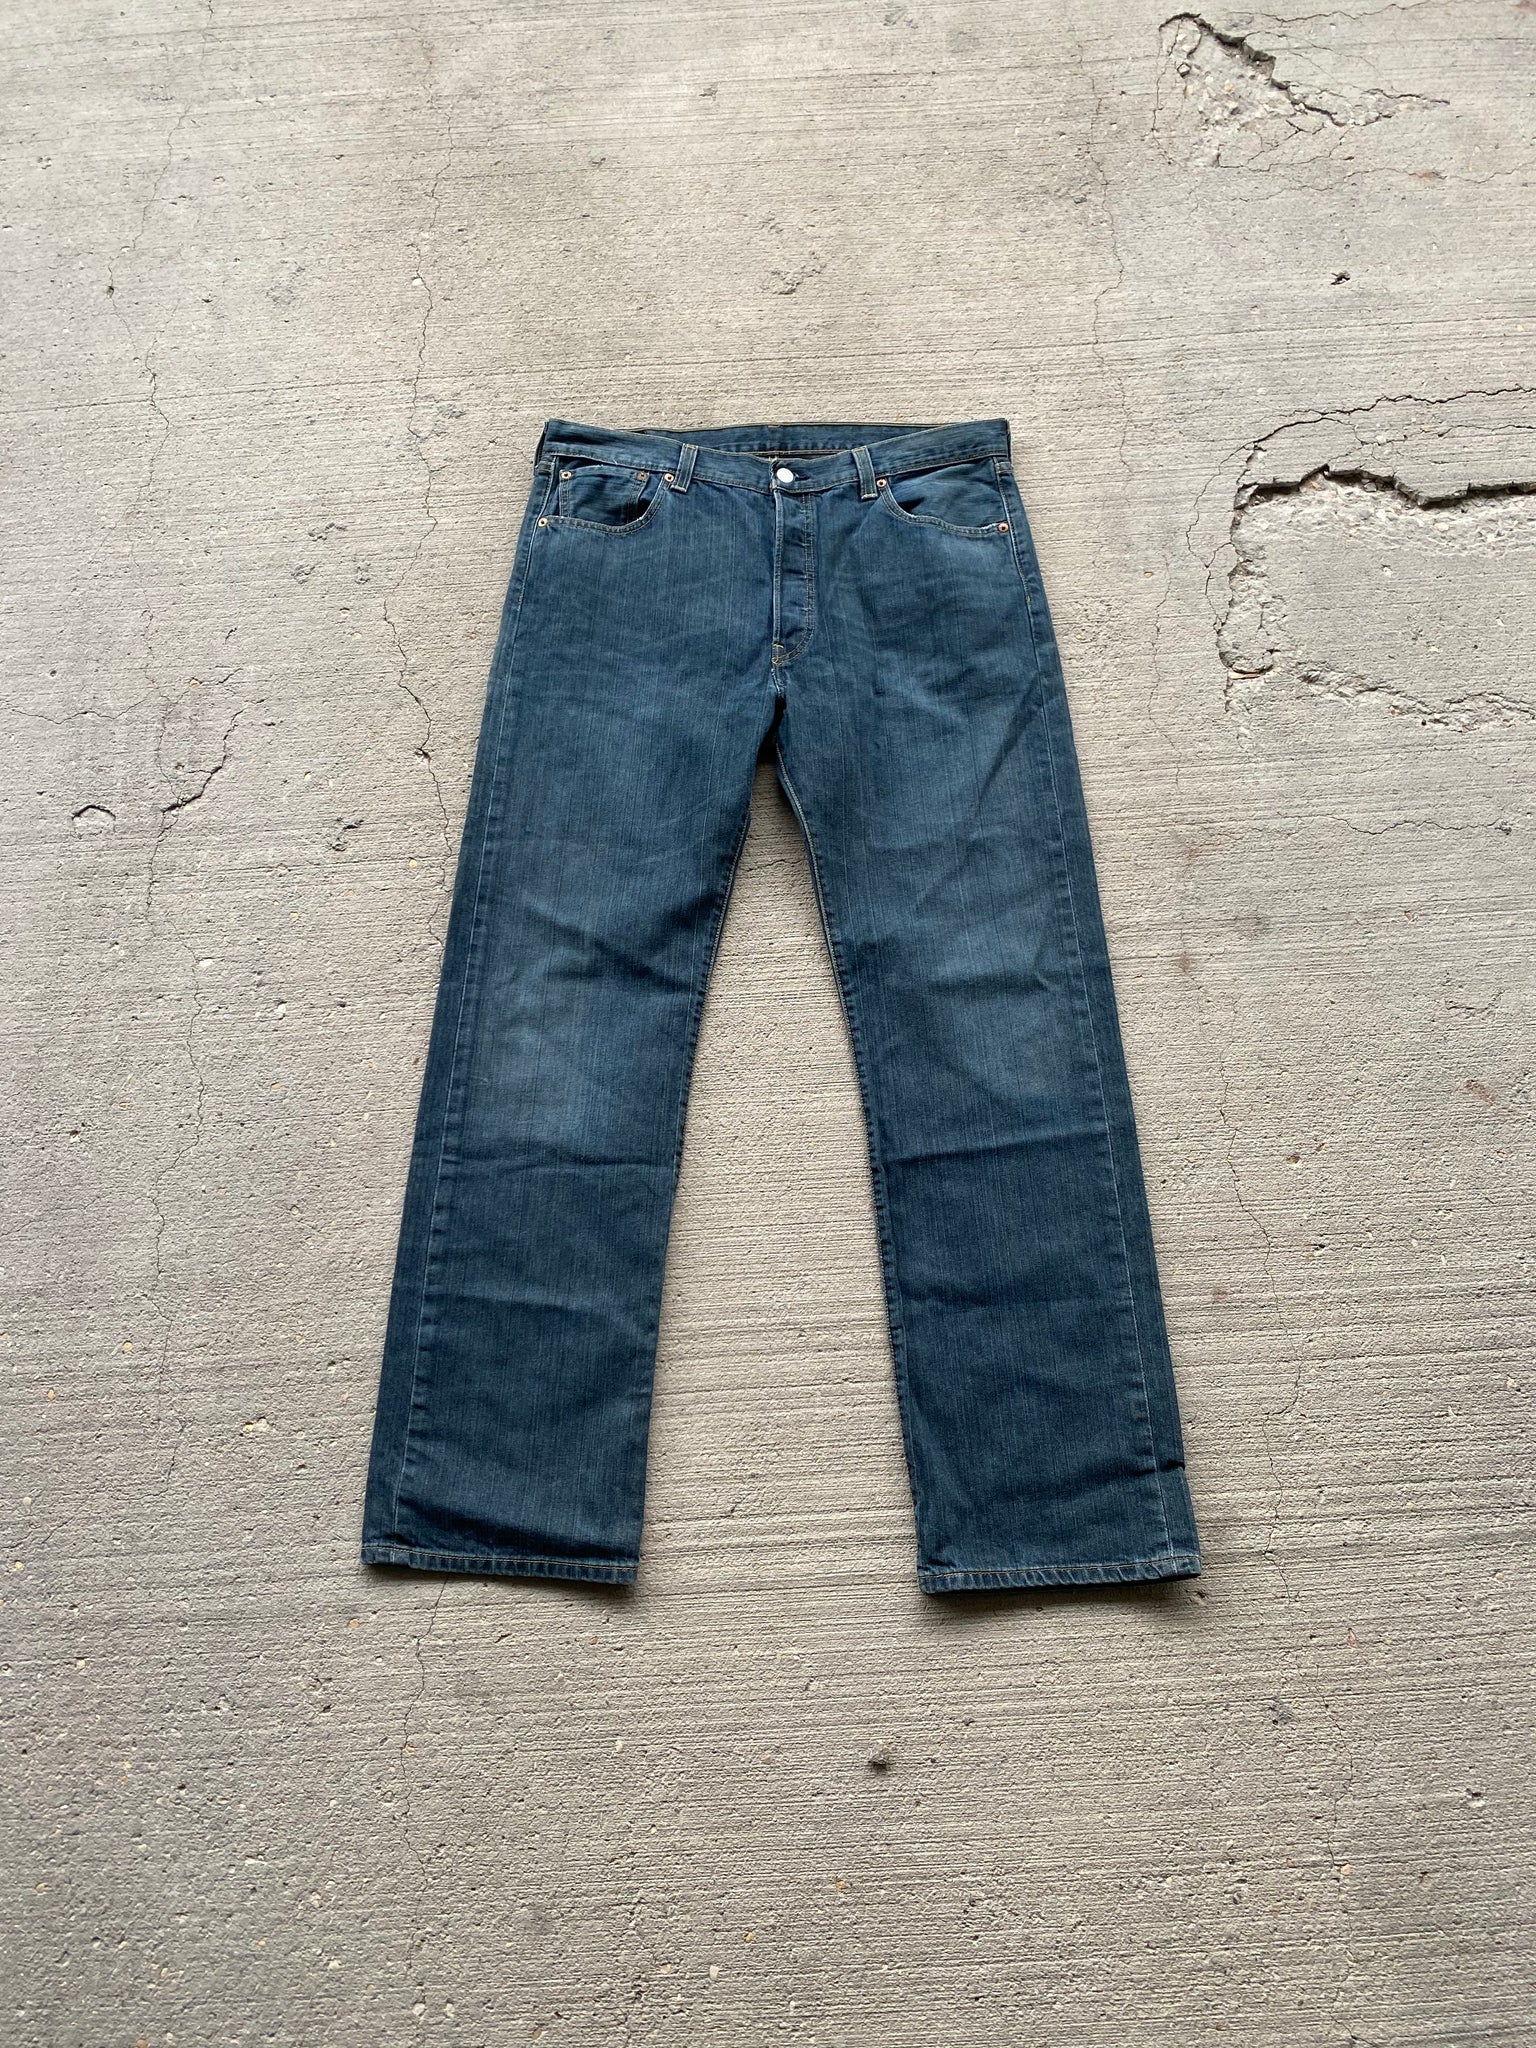 Vintage Levis 501 Jeans Size 30 Patched Levis Faded Levis Small Distressed Levis  501 Denim Reworked Levis -  Norway